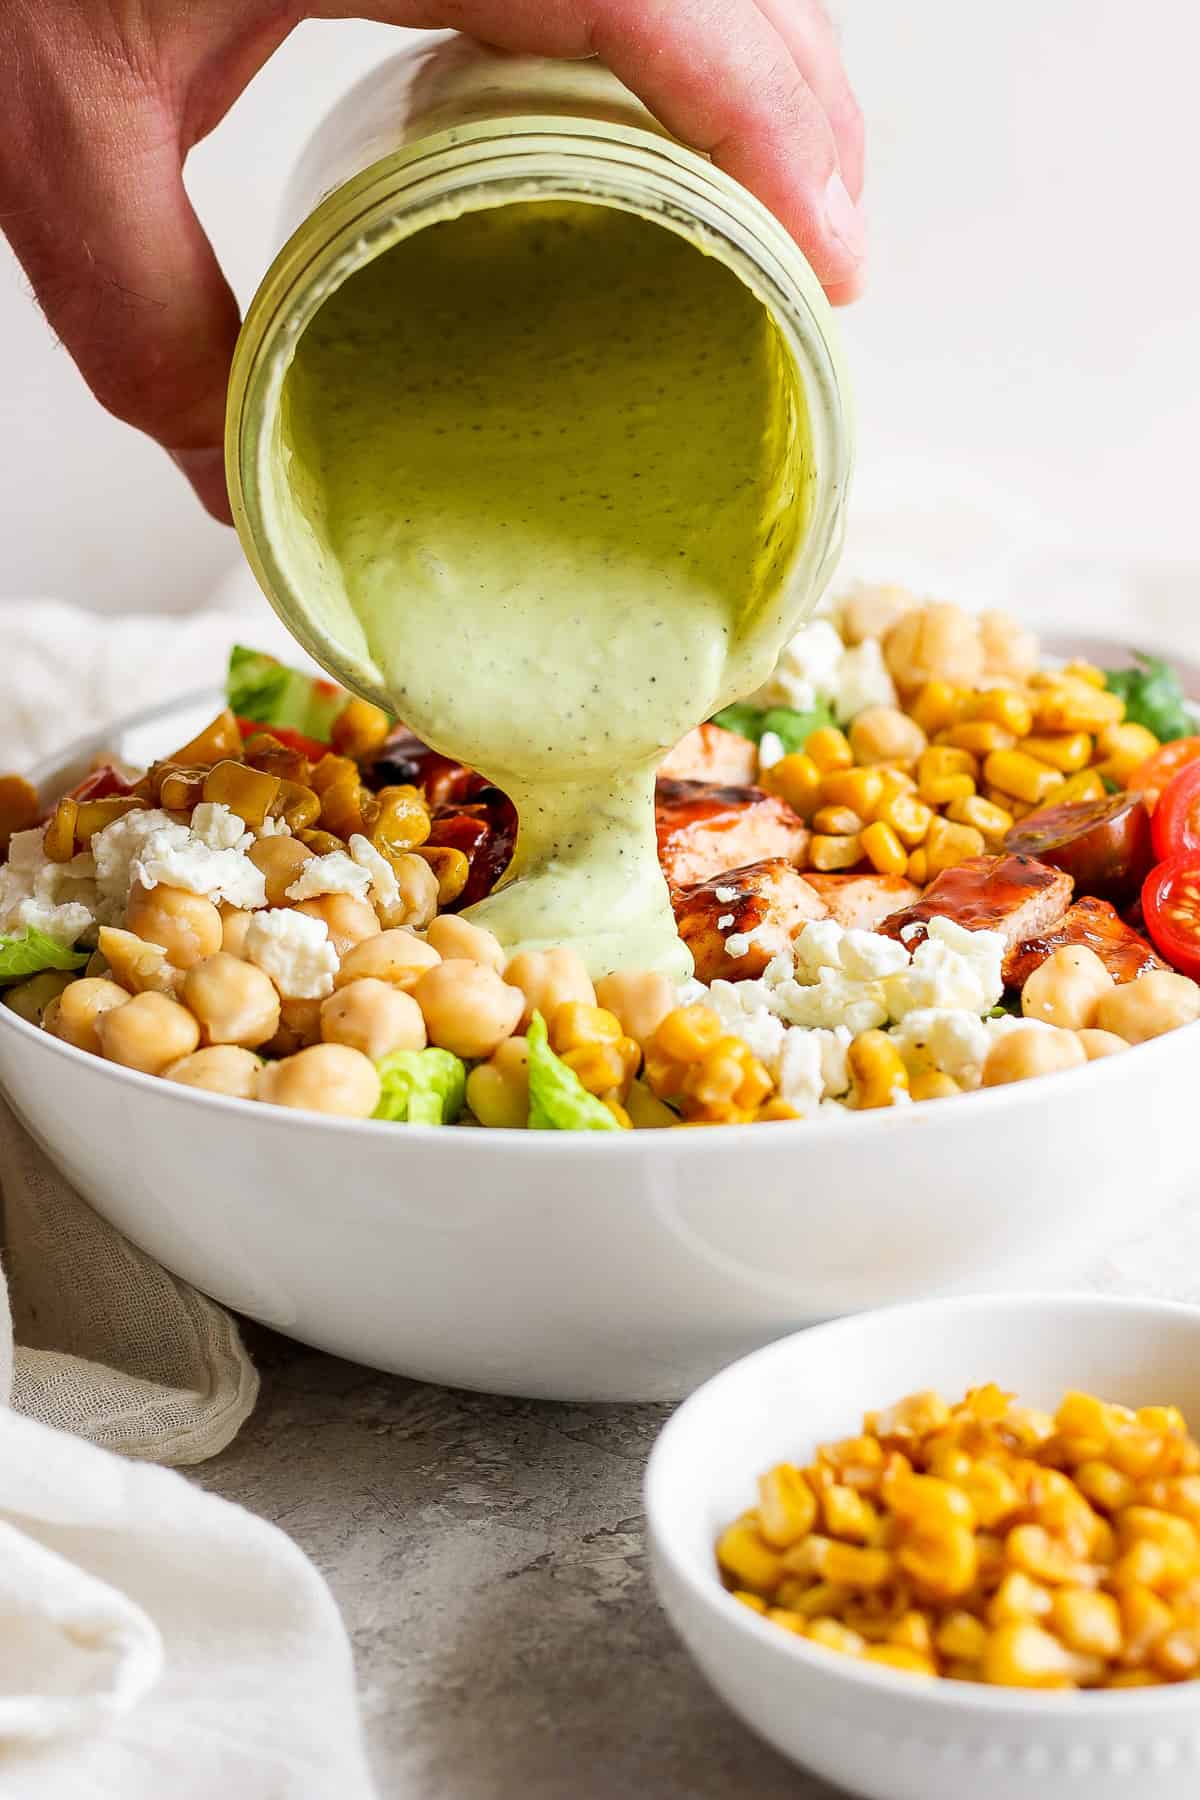 a person pouring a dressing into a bowl of salad.